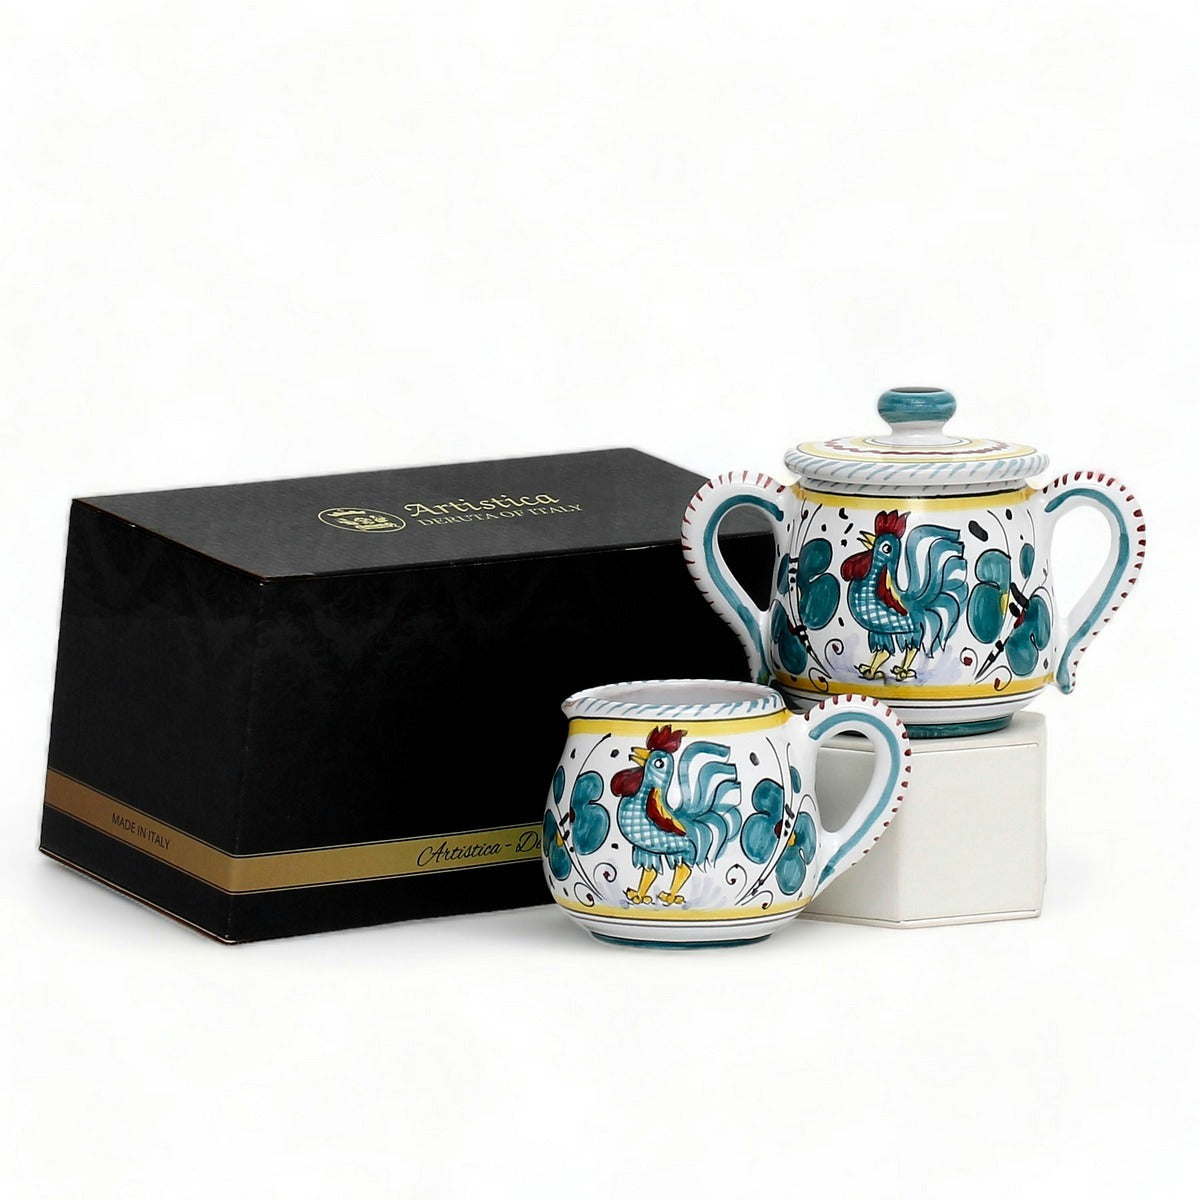 GIFT BOX: With authentic Deruta hand painted ceramic - Cream &amp; Sugar Set Green Rooster design